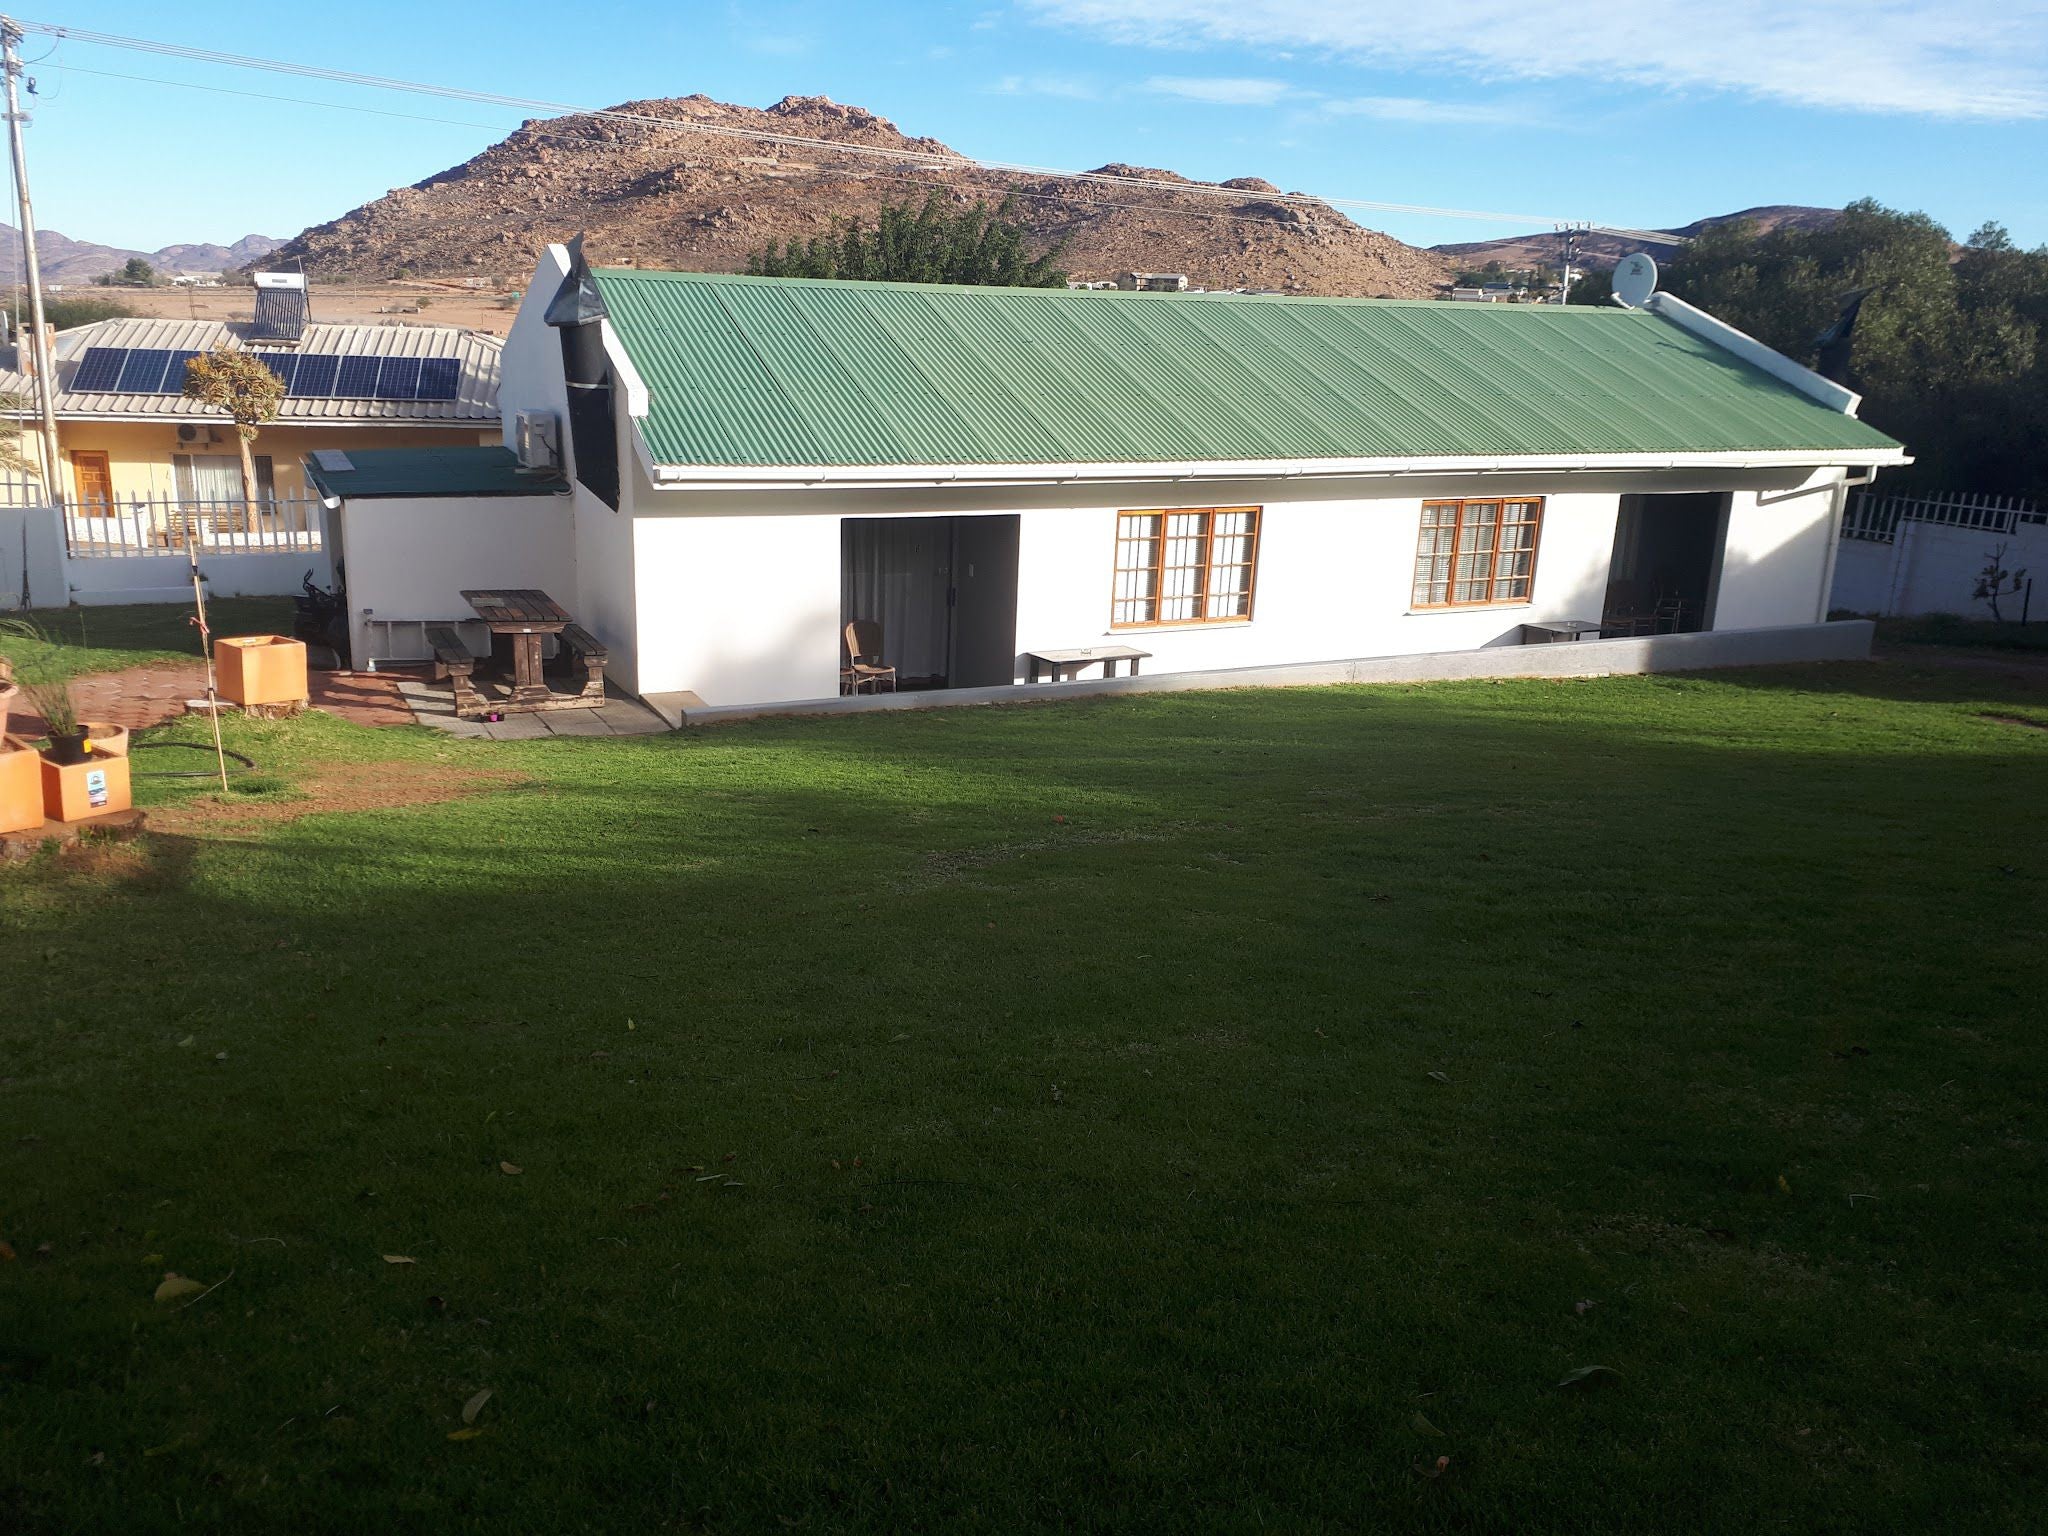 Desert Rose Guest House Springbok Northern Cape South Africa House, Building, Architecture, Highland, Nature